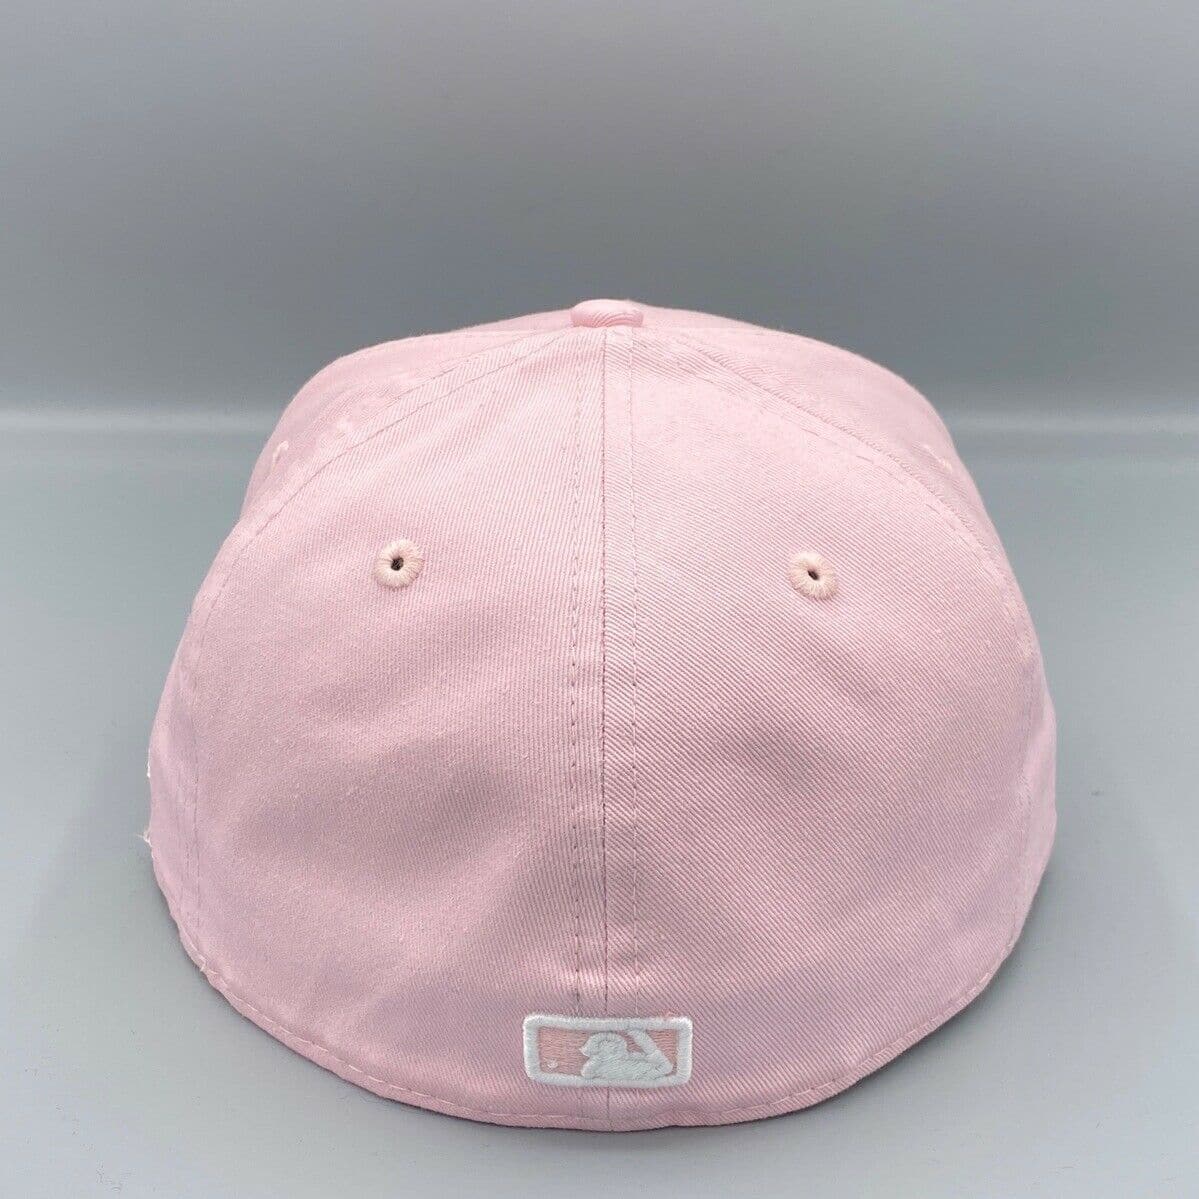 New Era 59Fifty Hat Pink York Fitted New Yankees